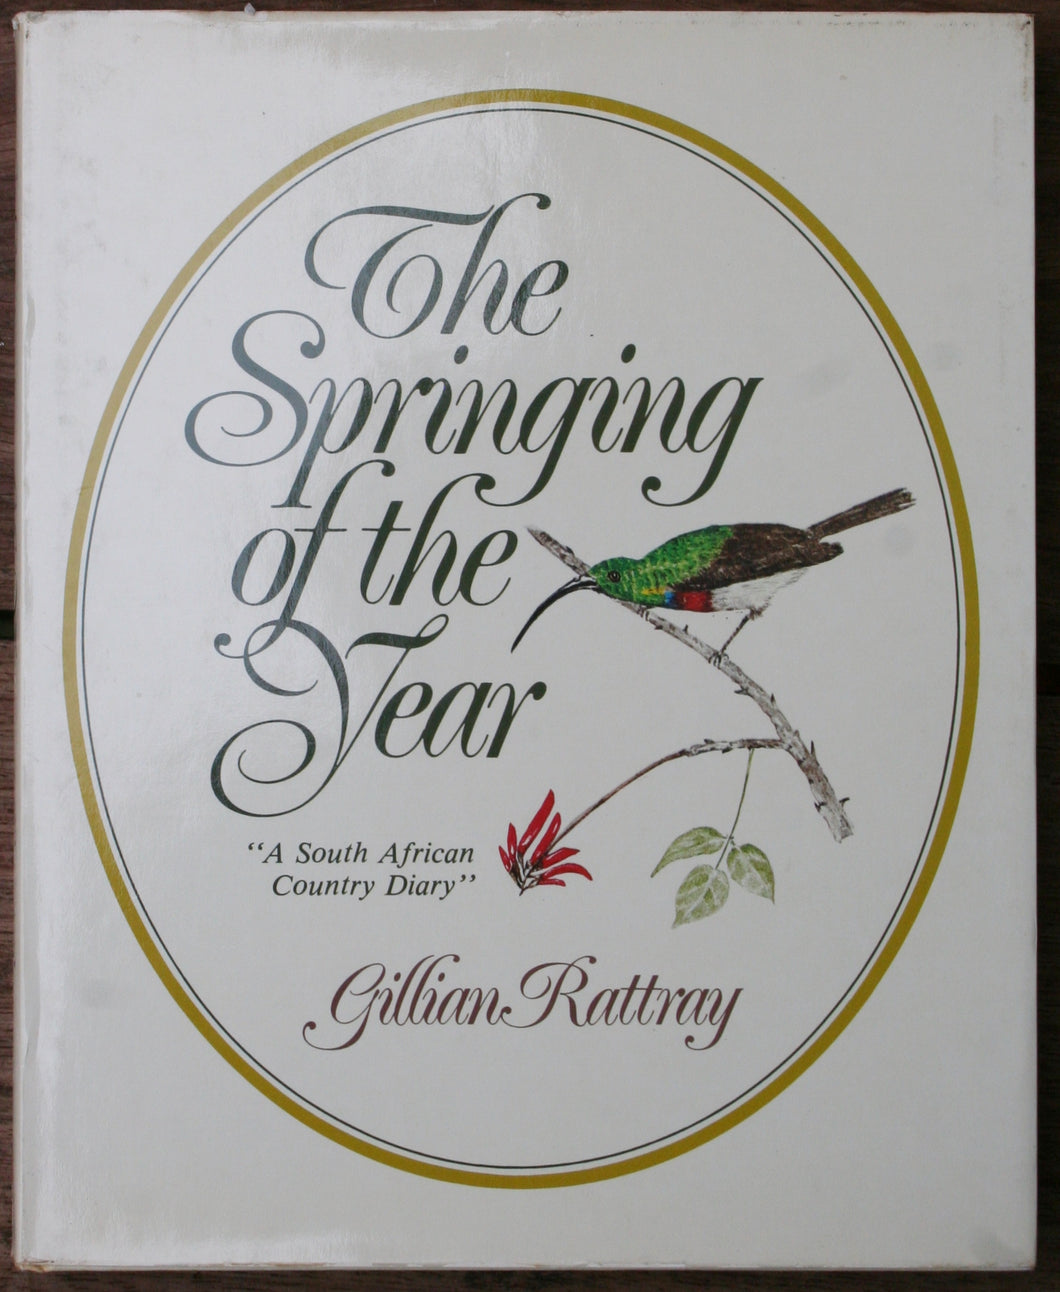 'THE SPRINGING OF THE YEAR' by Gillian Rattray